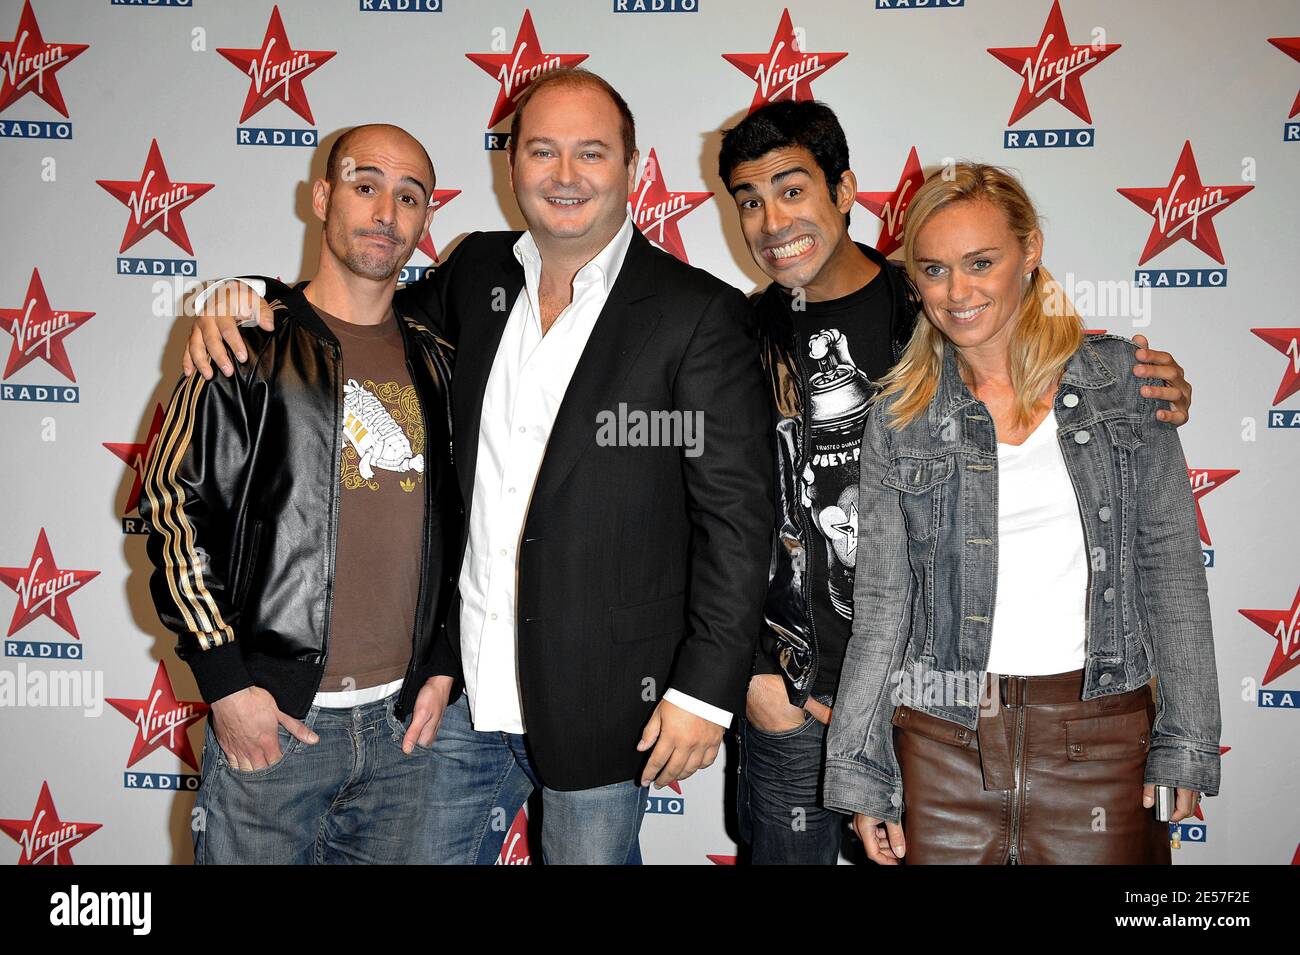 Sebastien Cauet and Cecile de Menibus attend the annual press conference of  Virgin TV channel and Virgin radio held at the Mini Palais in Paris, France  on September 16, 2008. Photo by